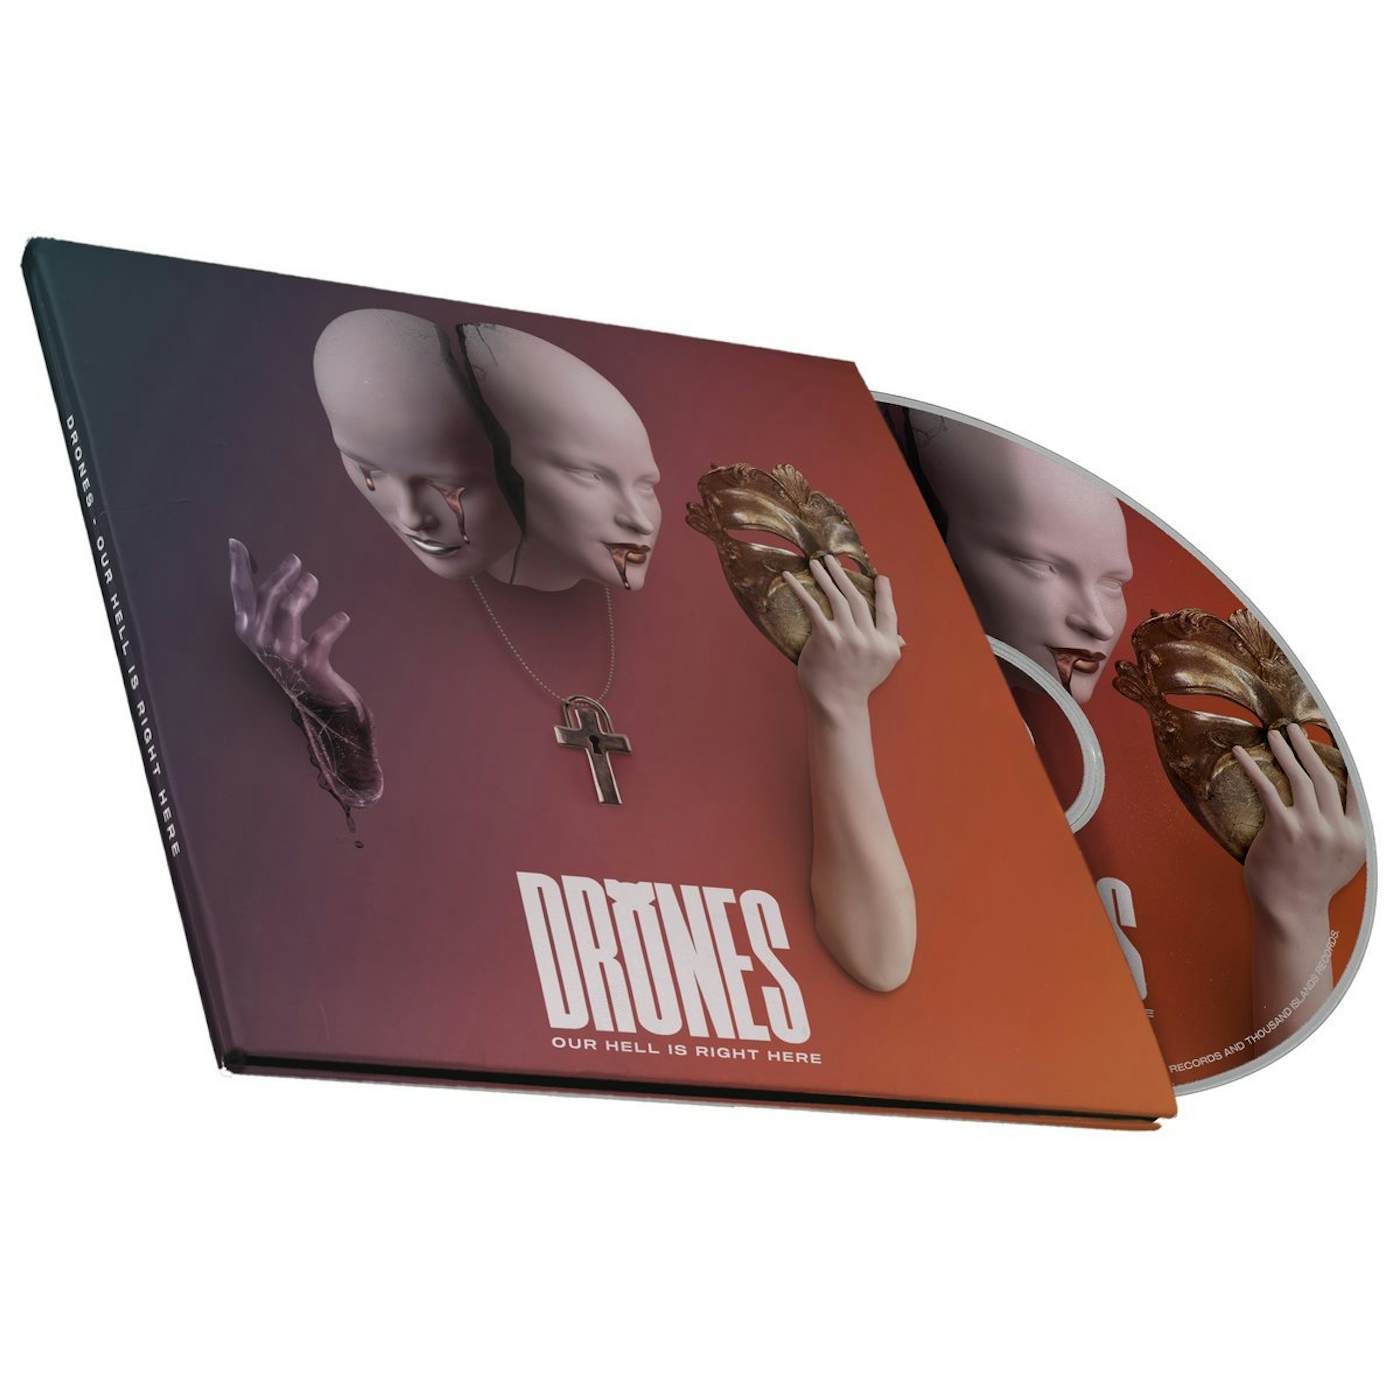 Drones / Our Hell Is Right Here - CD